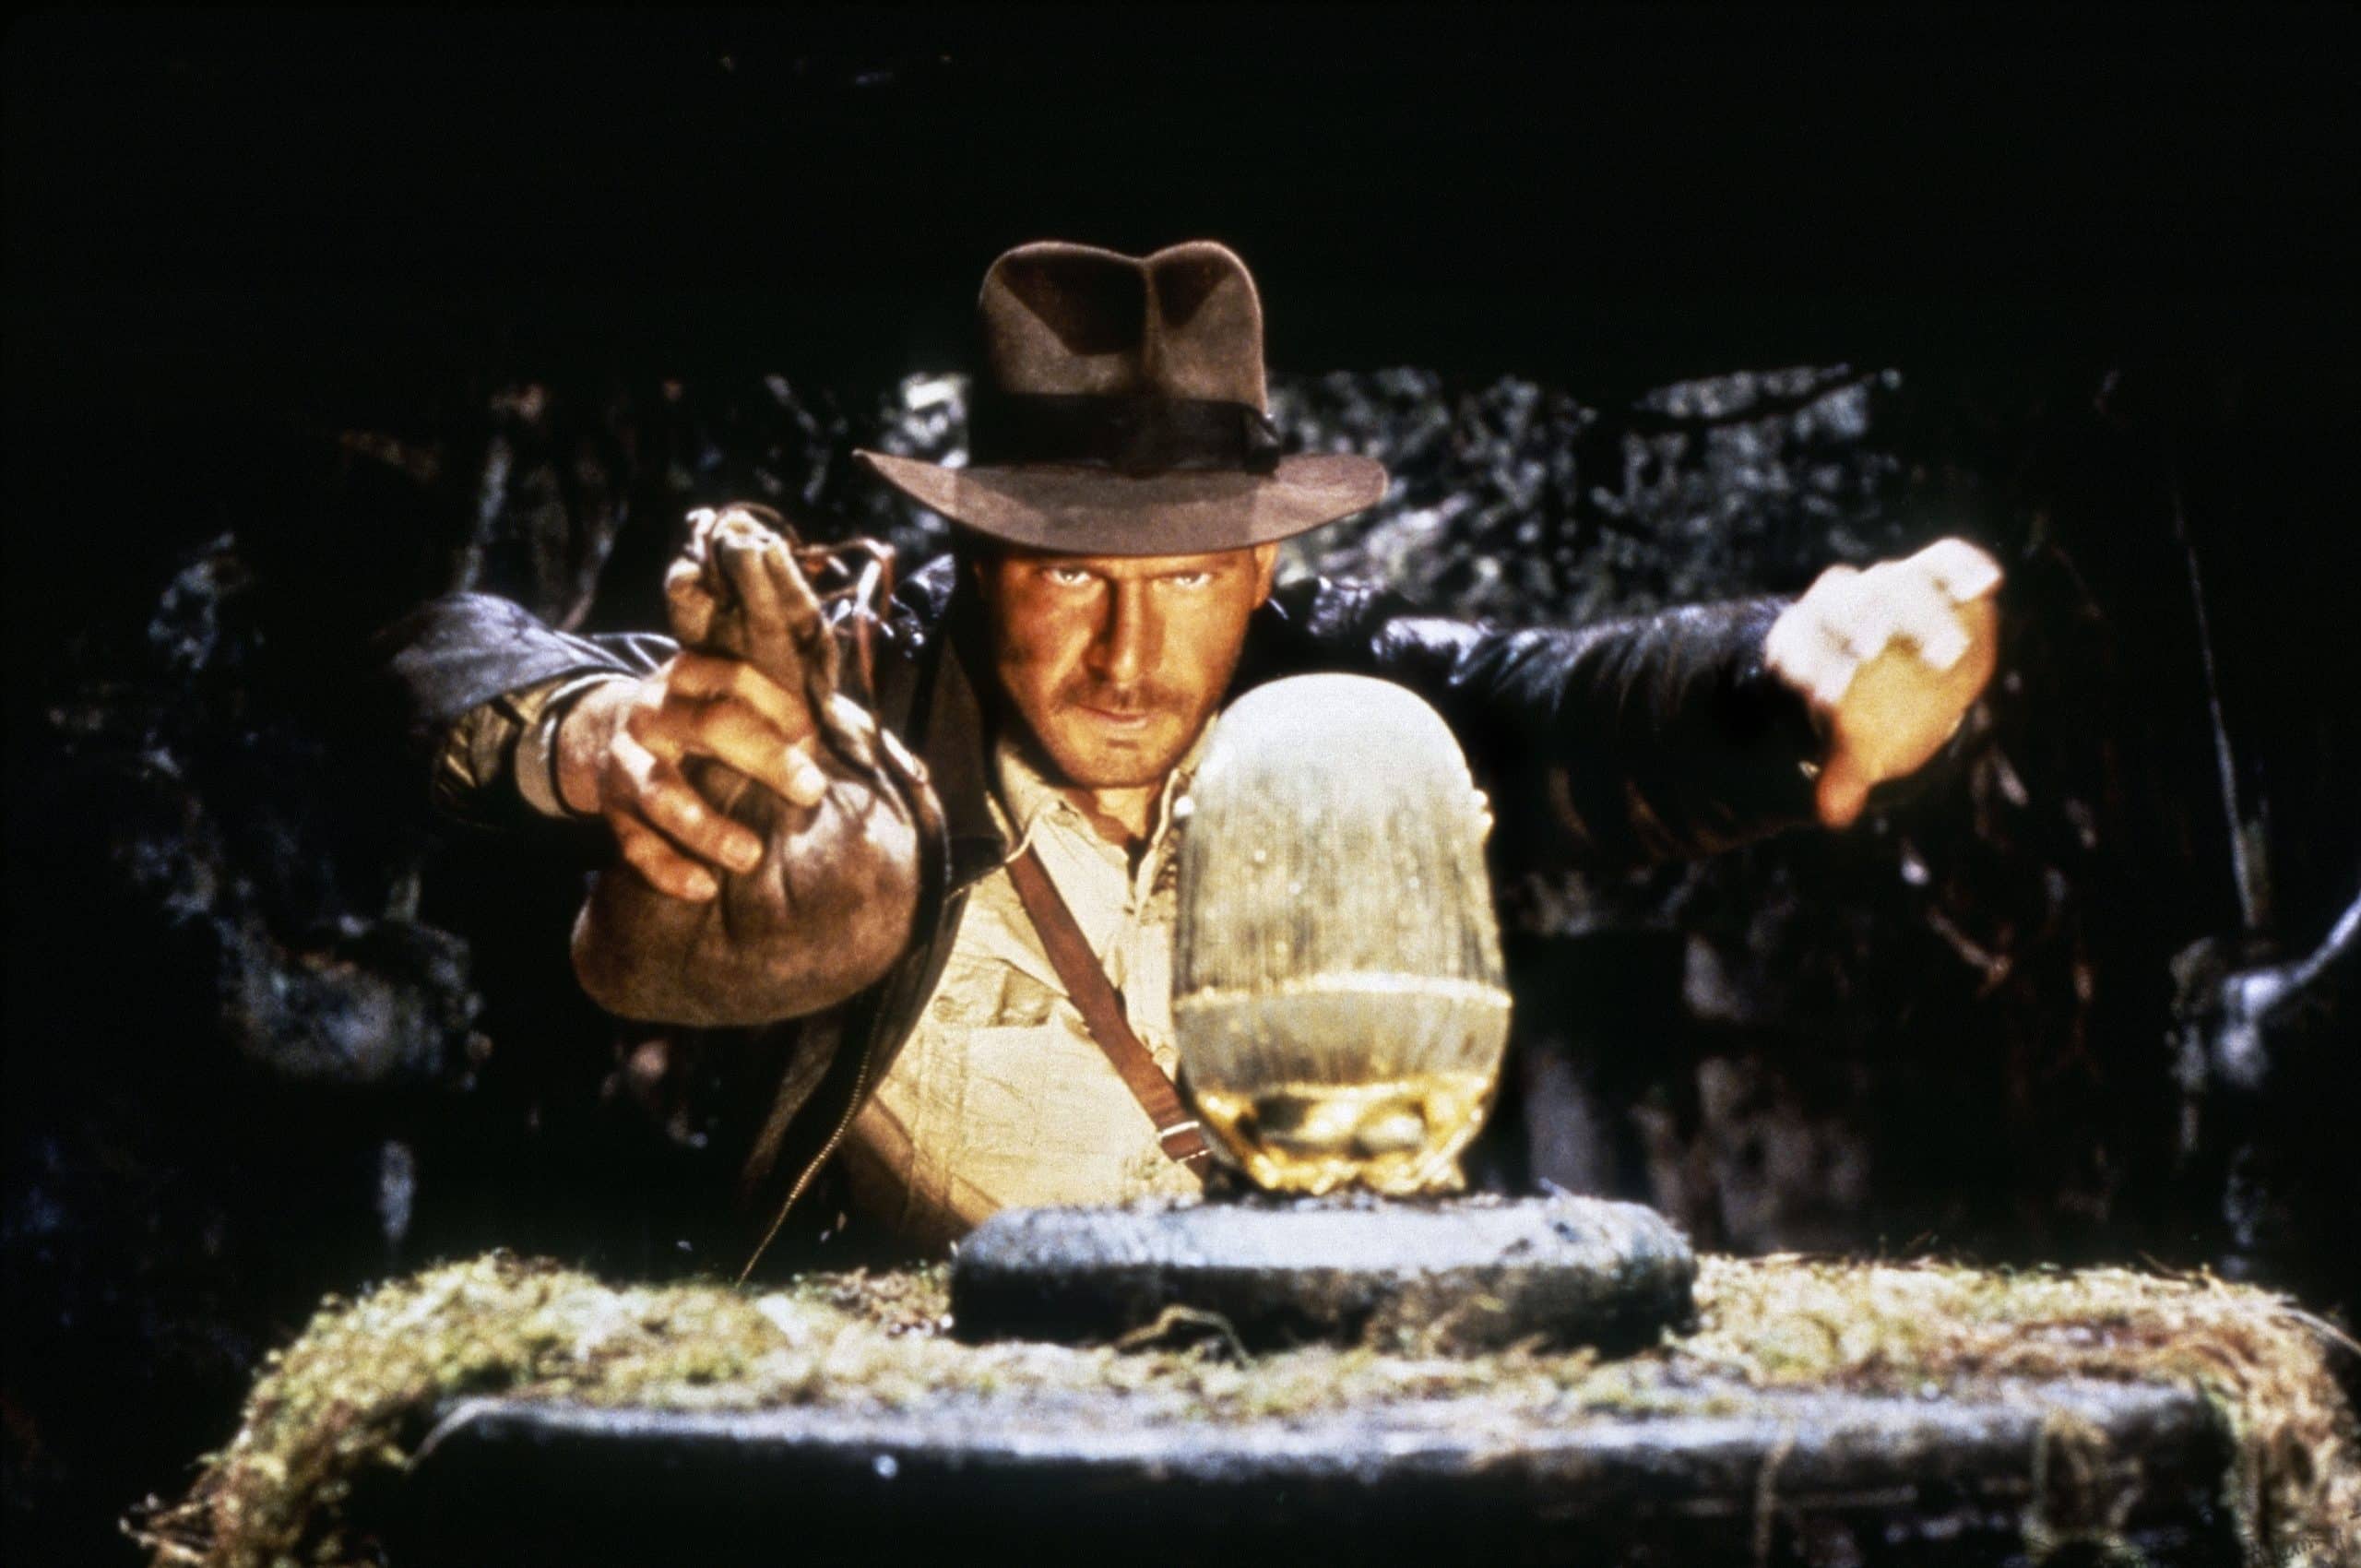 RAIDERS OF THE LOST ARK, Harrison Ford as Indiana Jones, 1981